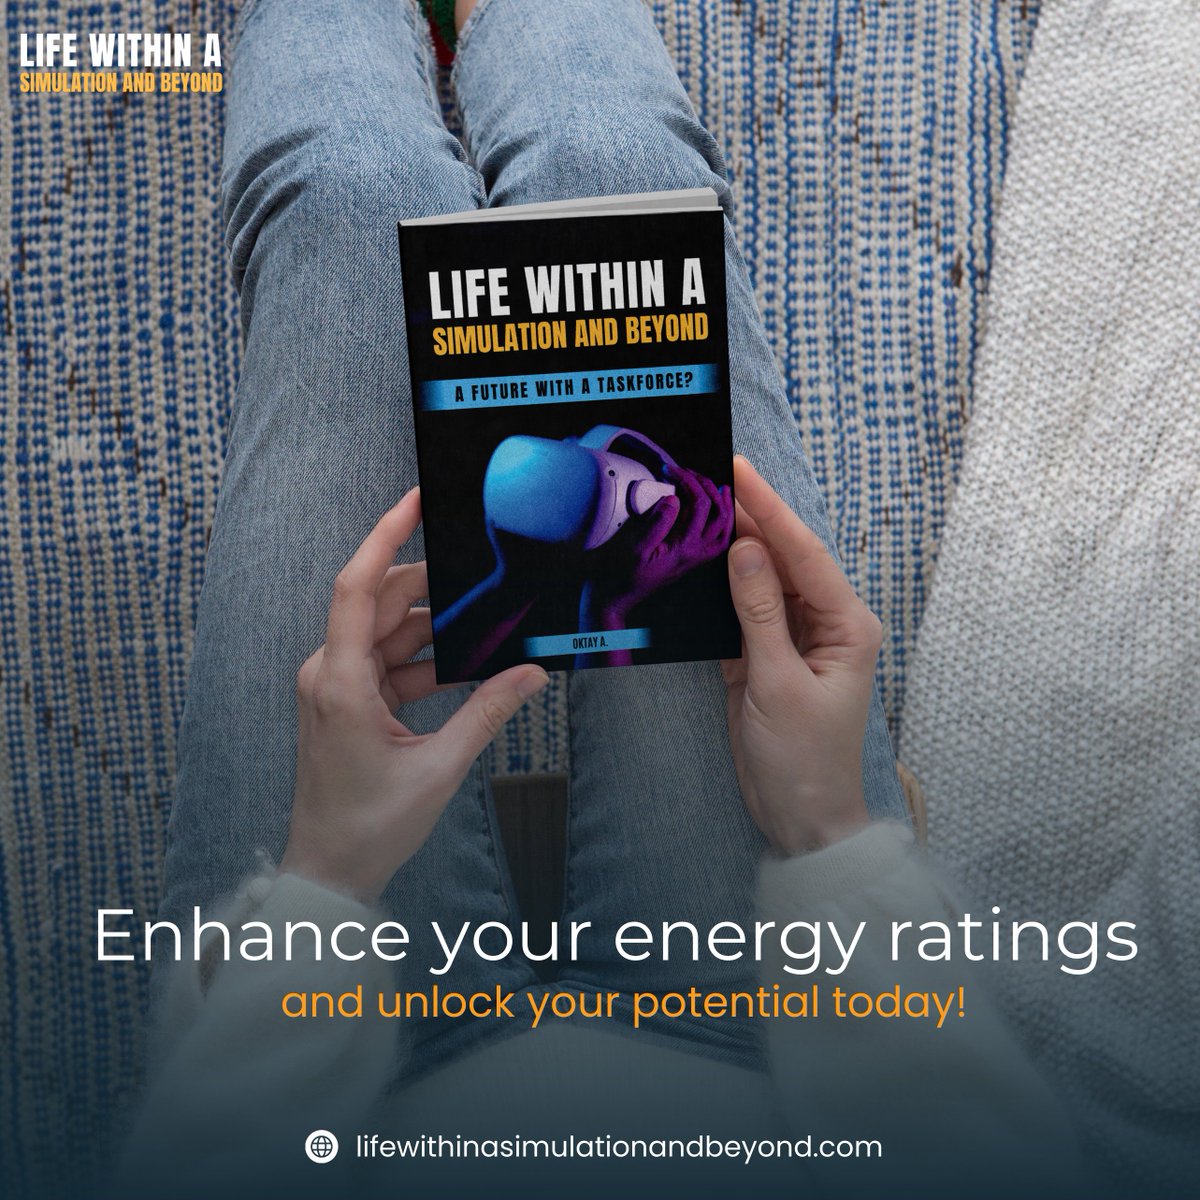 Don't miss out on the opportunity to learn about #energy ratings and how to enhance them within yourself. This e-book is highly recommended for those who are curious about the #simulation we inhabit and how to achieve its standards of growth
#EnergyRatings 
#LifeWithinASimulation